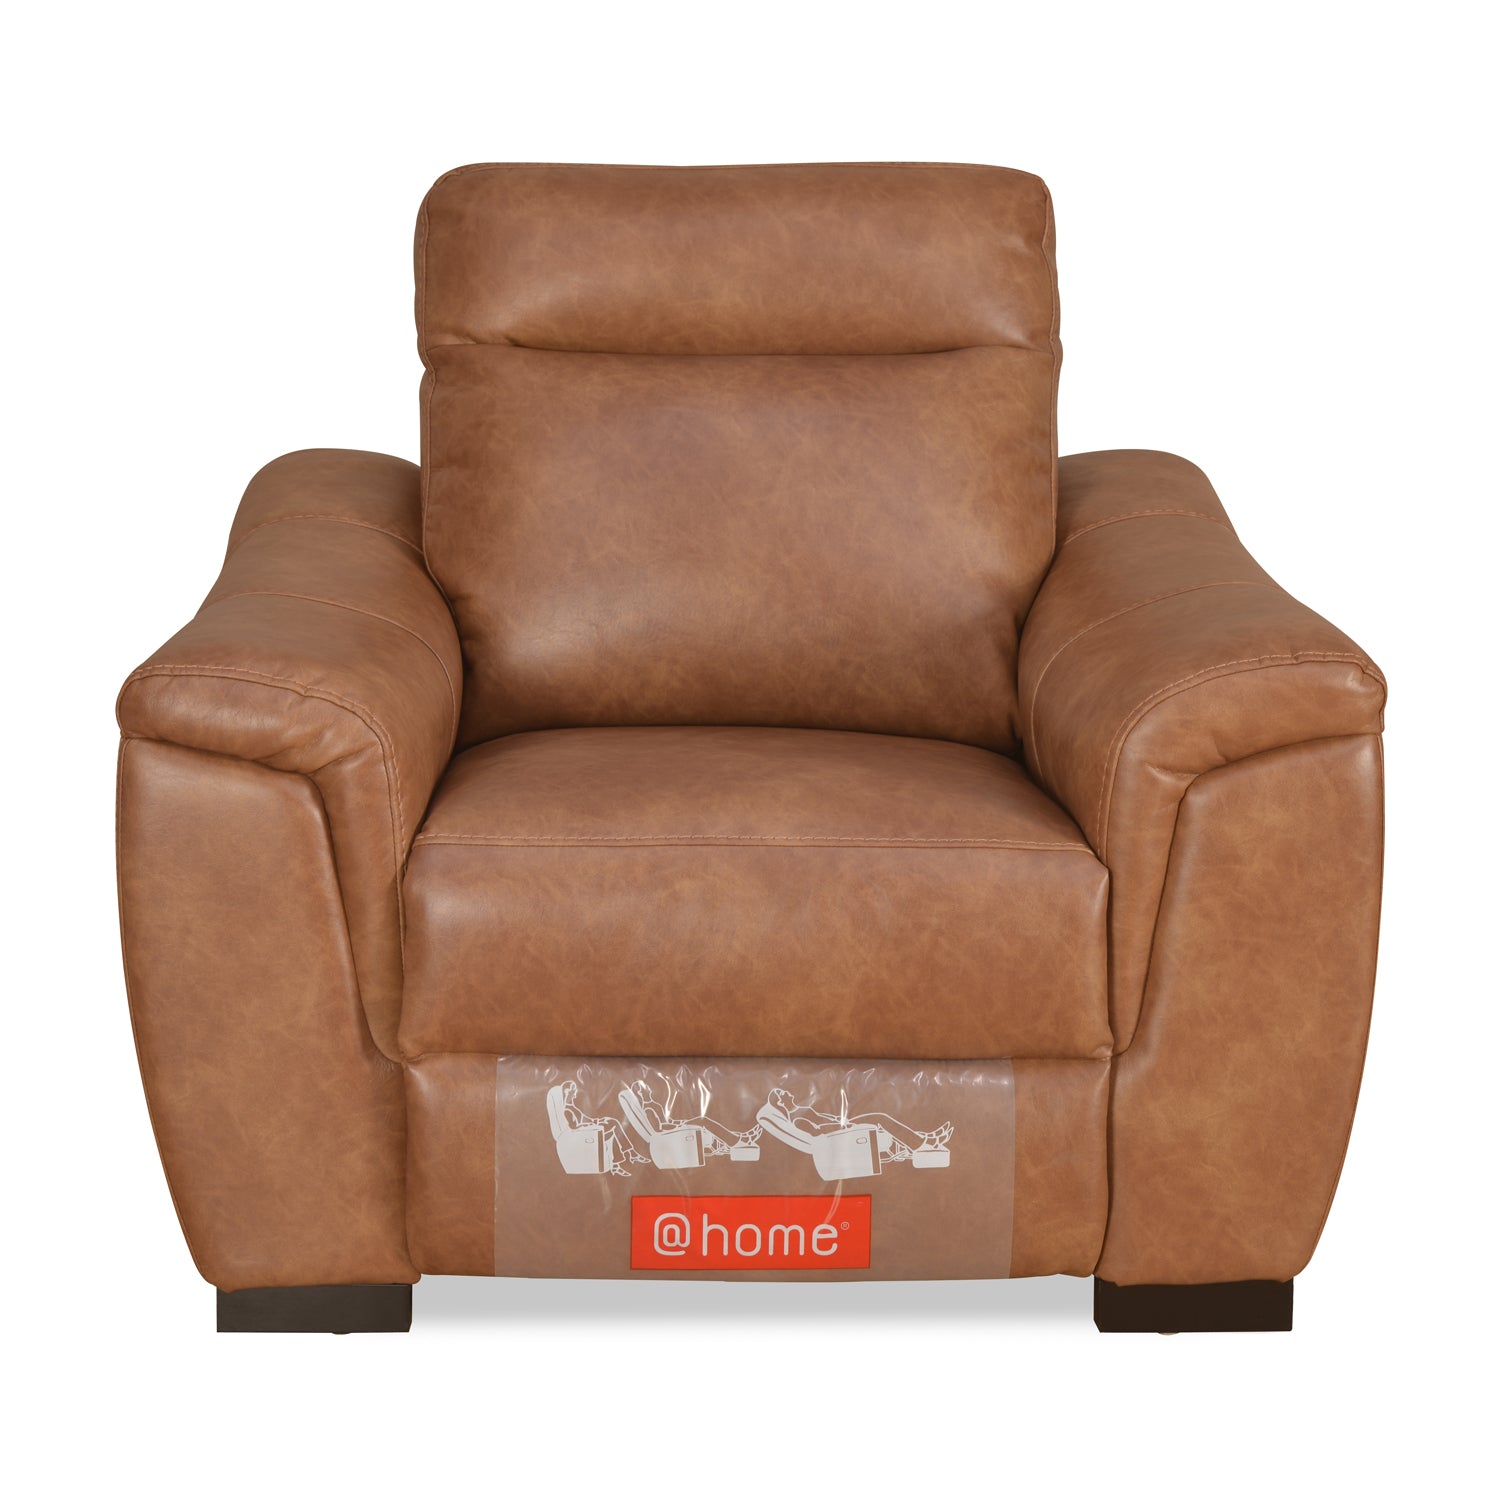 Evelyn 1 Seater Sofa Electrical Recliner (Tan Brown)